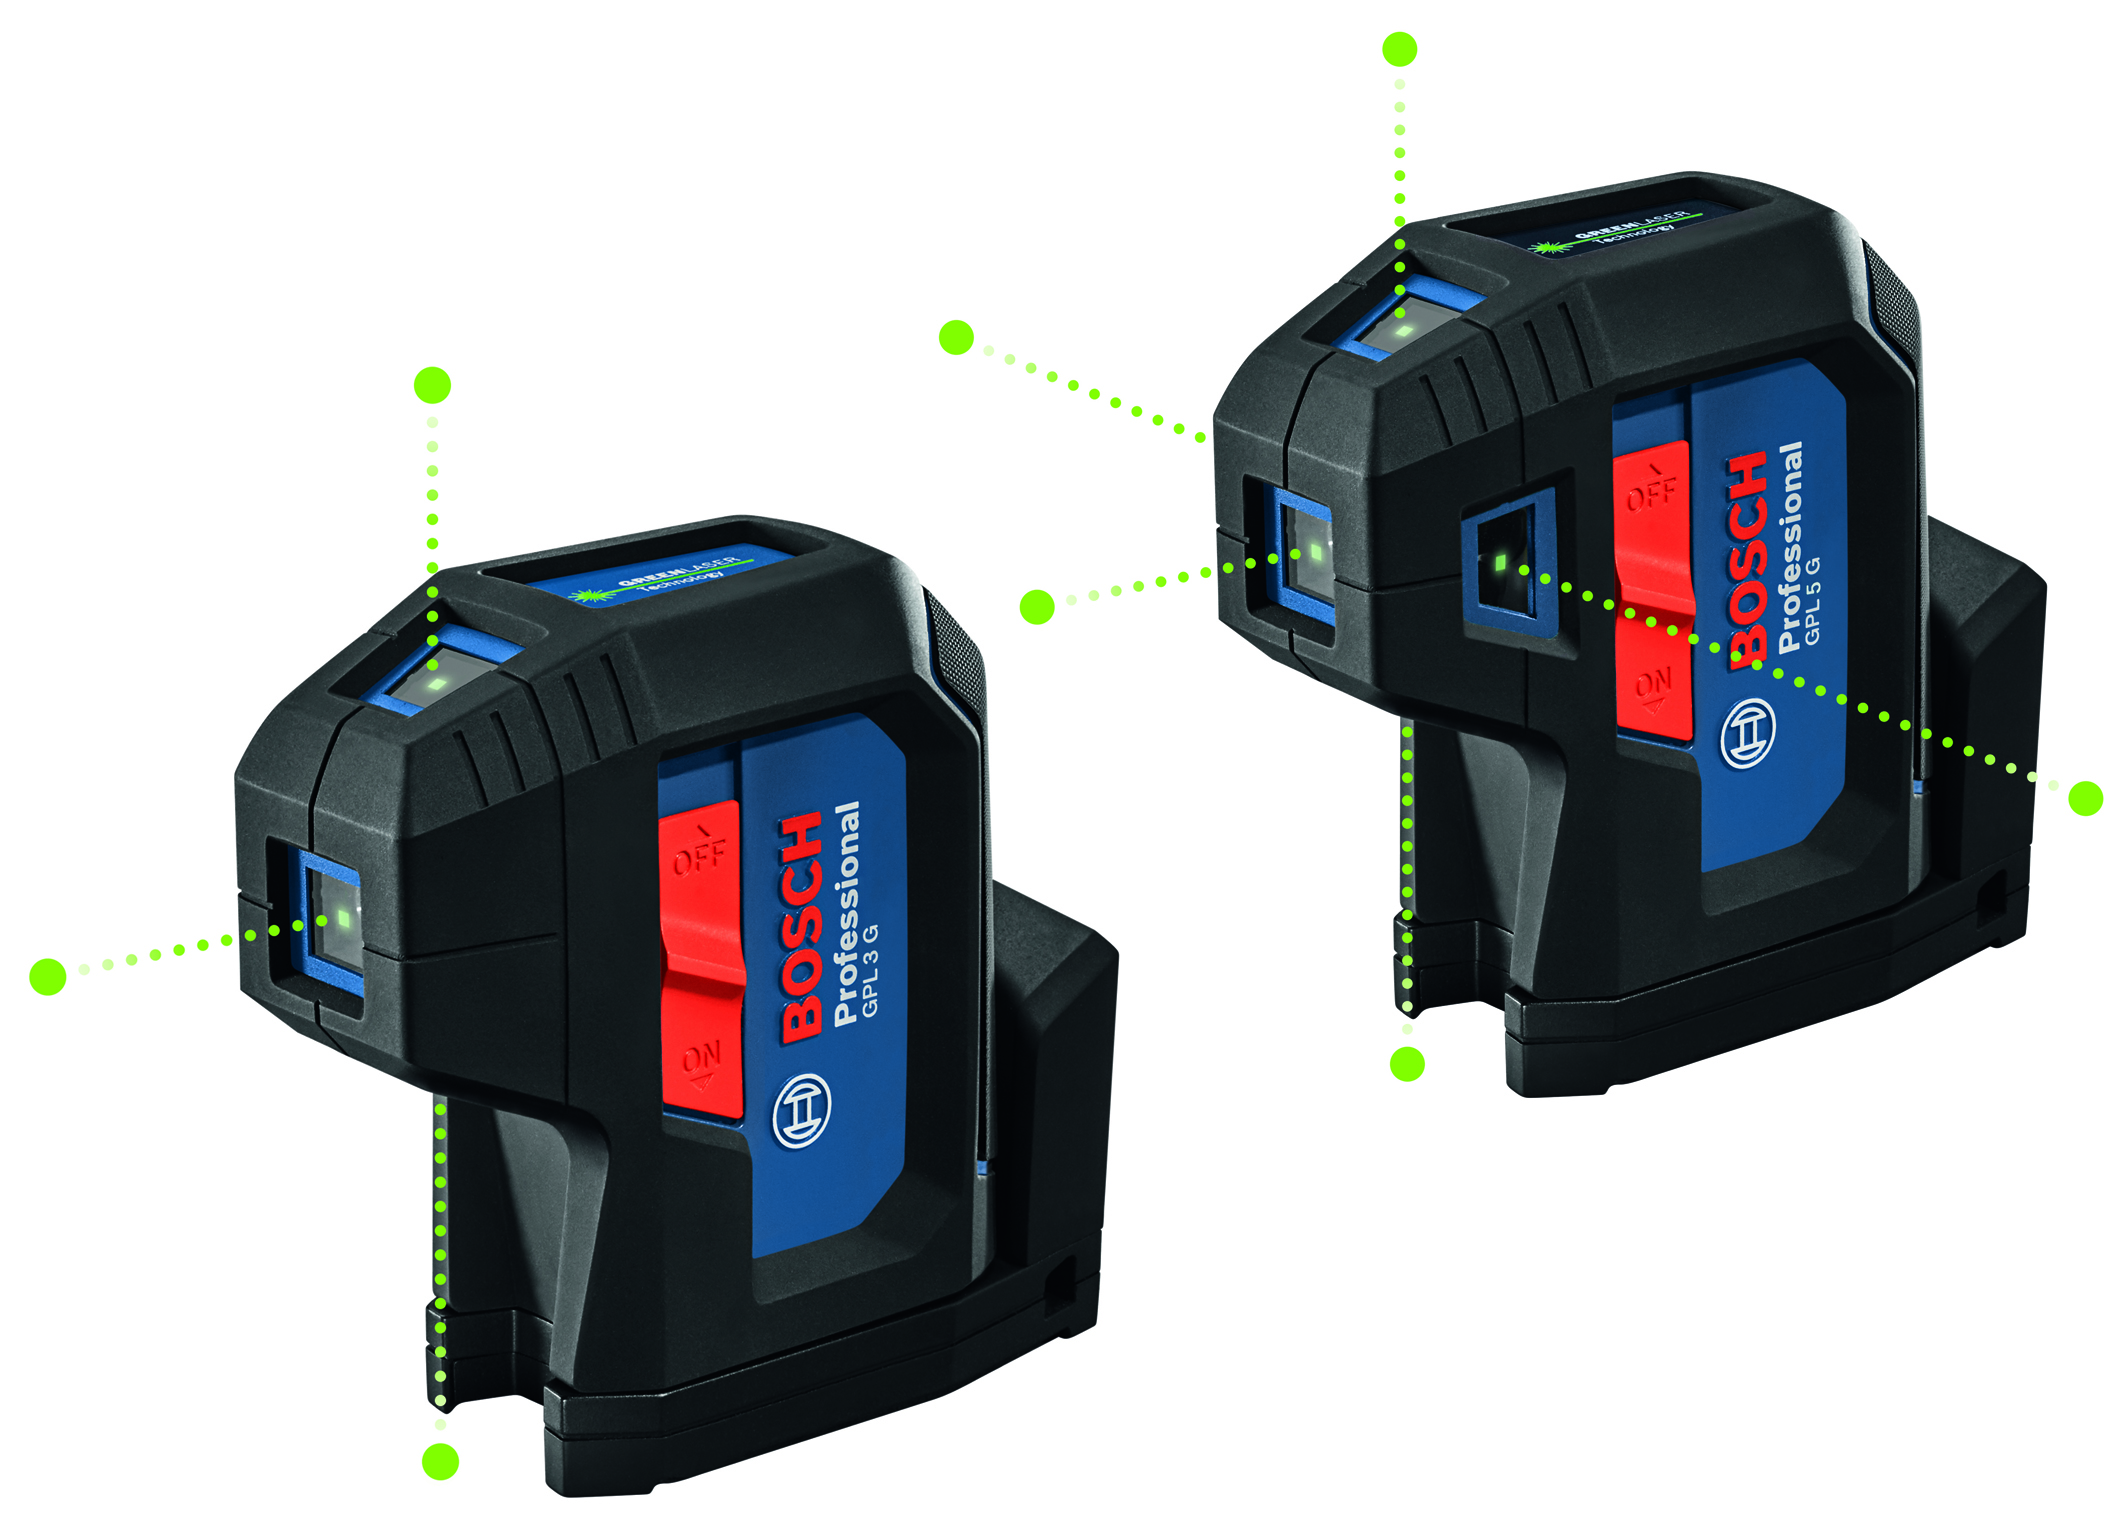 More robust than ever for use on construction sites: New Bosch point laser generation for professionals